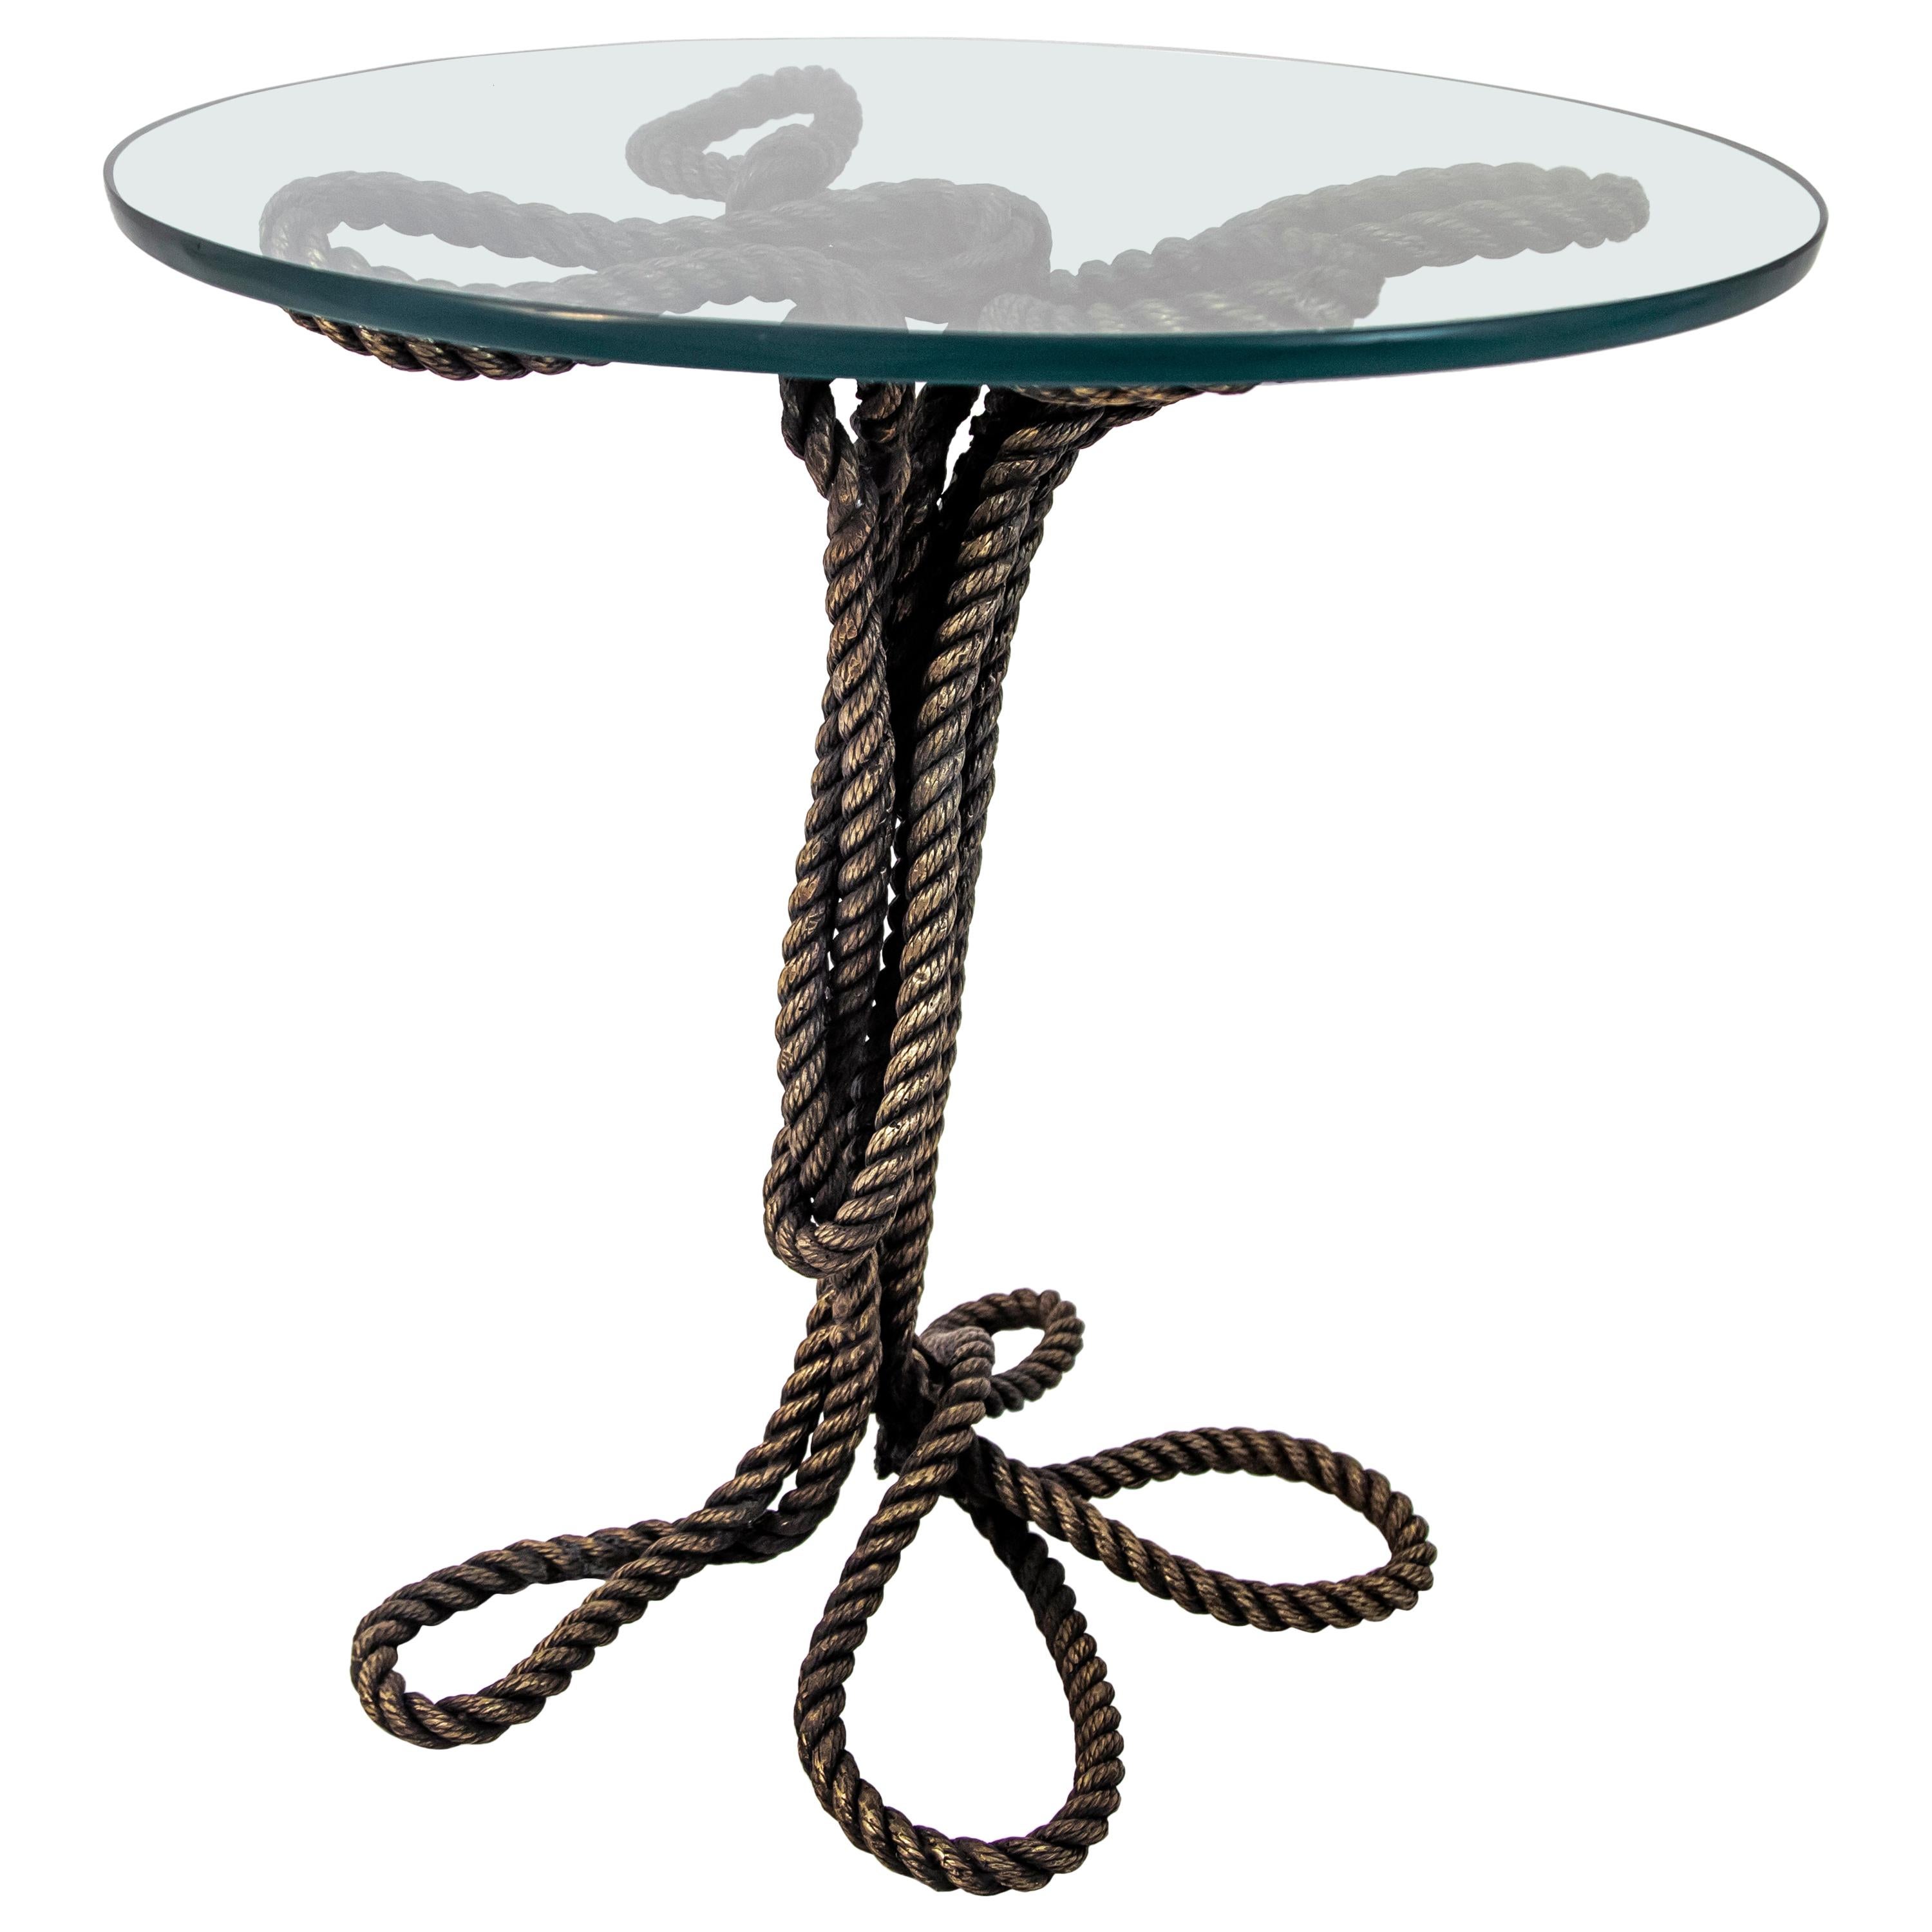 Electra Cast Bronze Rope Tempered Glass Coffee Table by Allegra Hicks For Sale